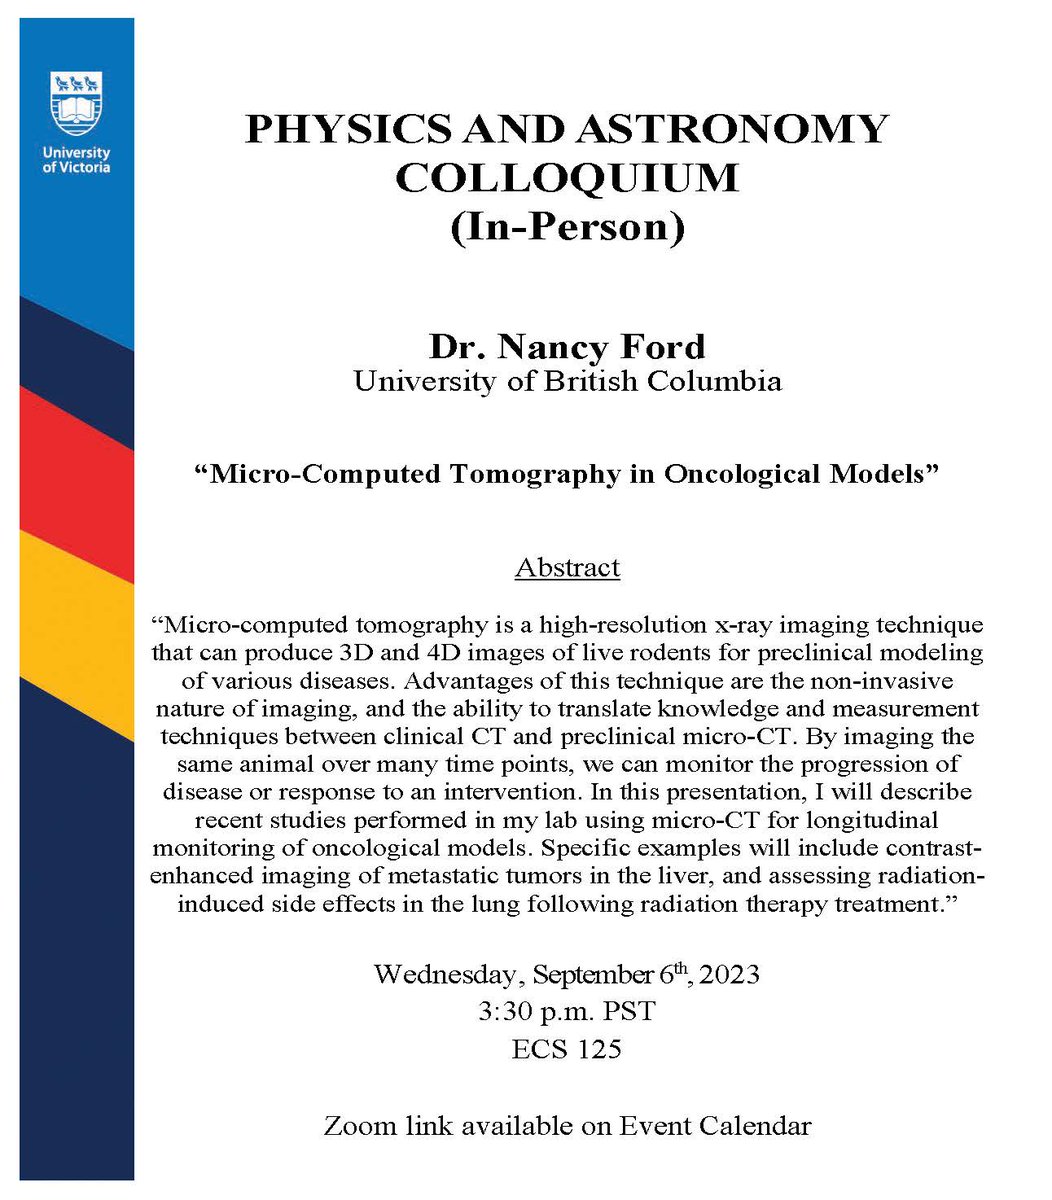 COLLOQUIUM (In-Person): Dr. Nancy Ford, University of British Columbia, will give an in-person colloquium on Wednesday November 22nd at 3:30pm PST. For more information: events.uvic.ca/physics/event/…